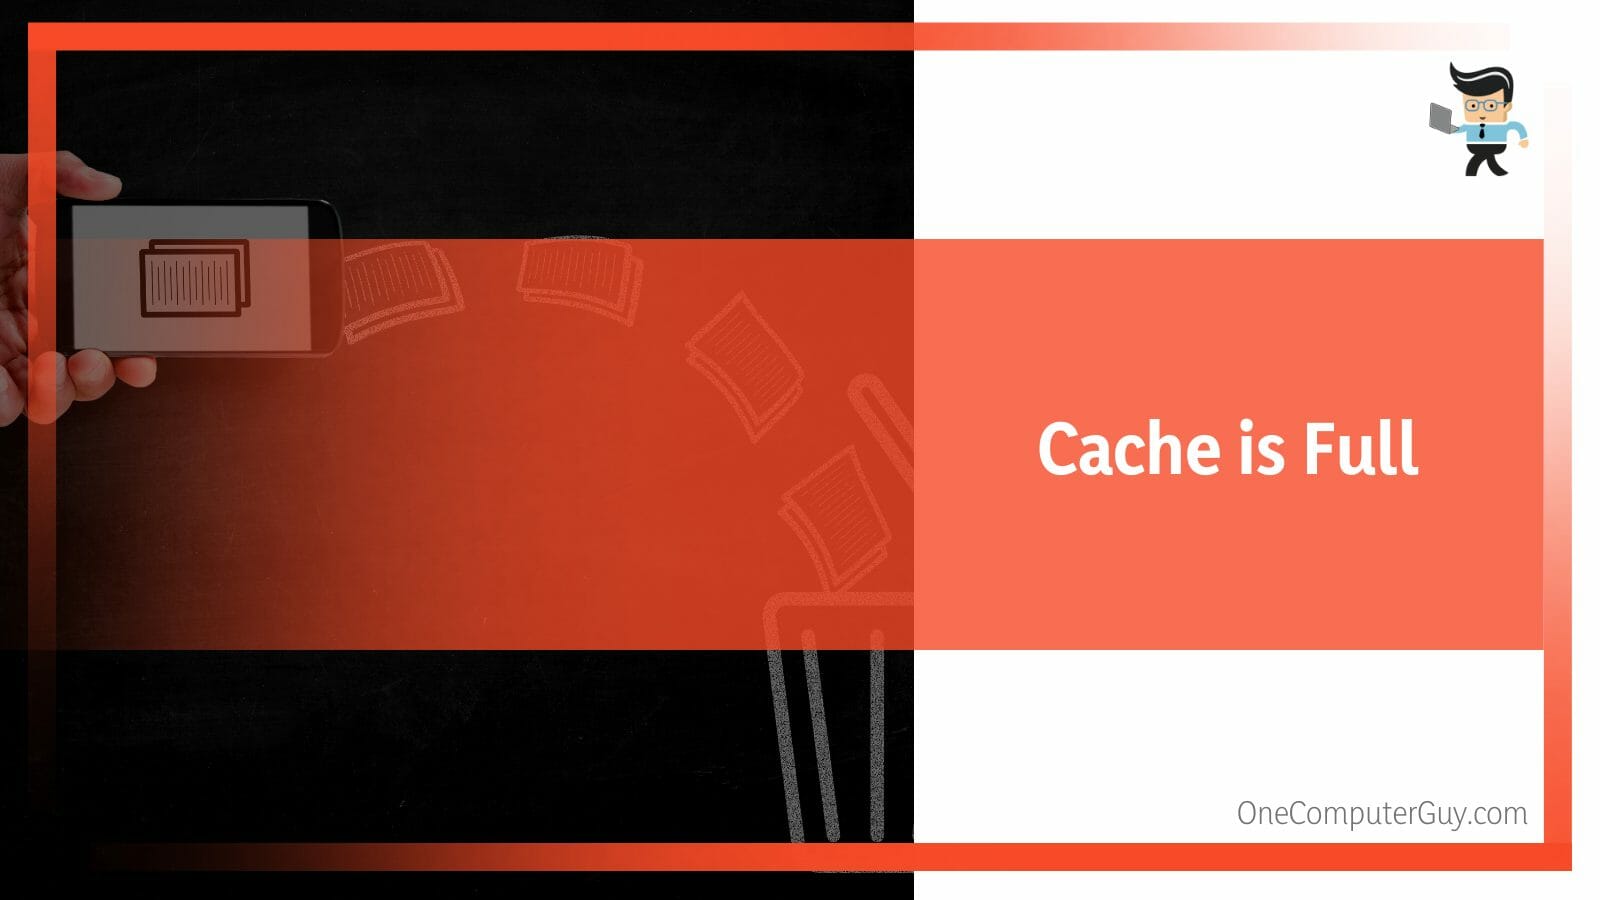 Cache is Full